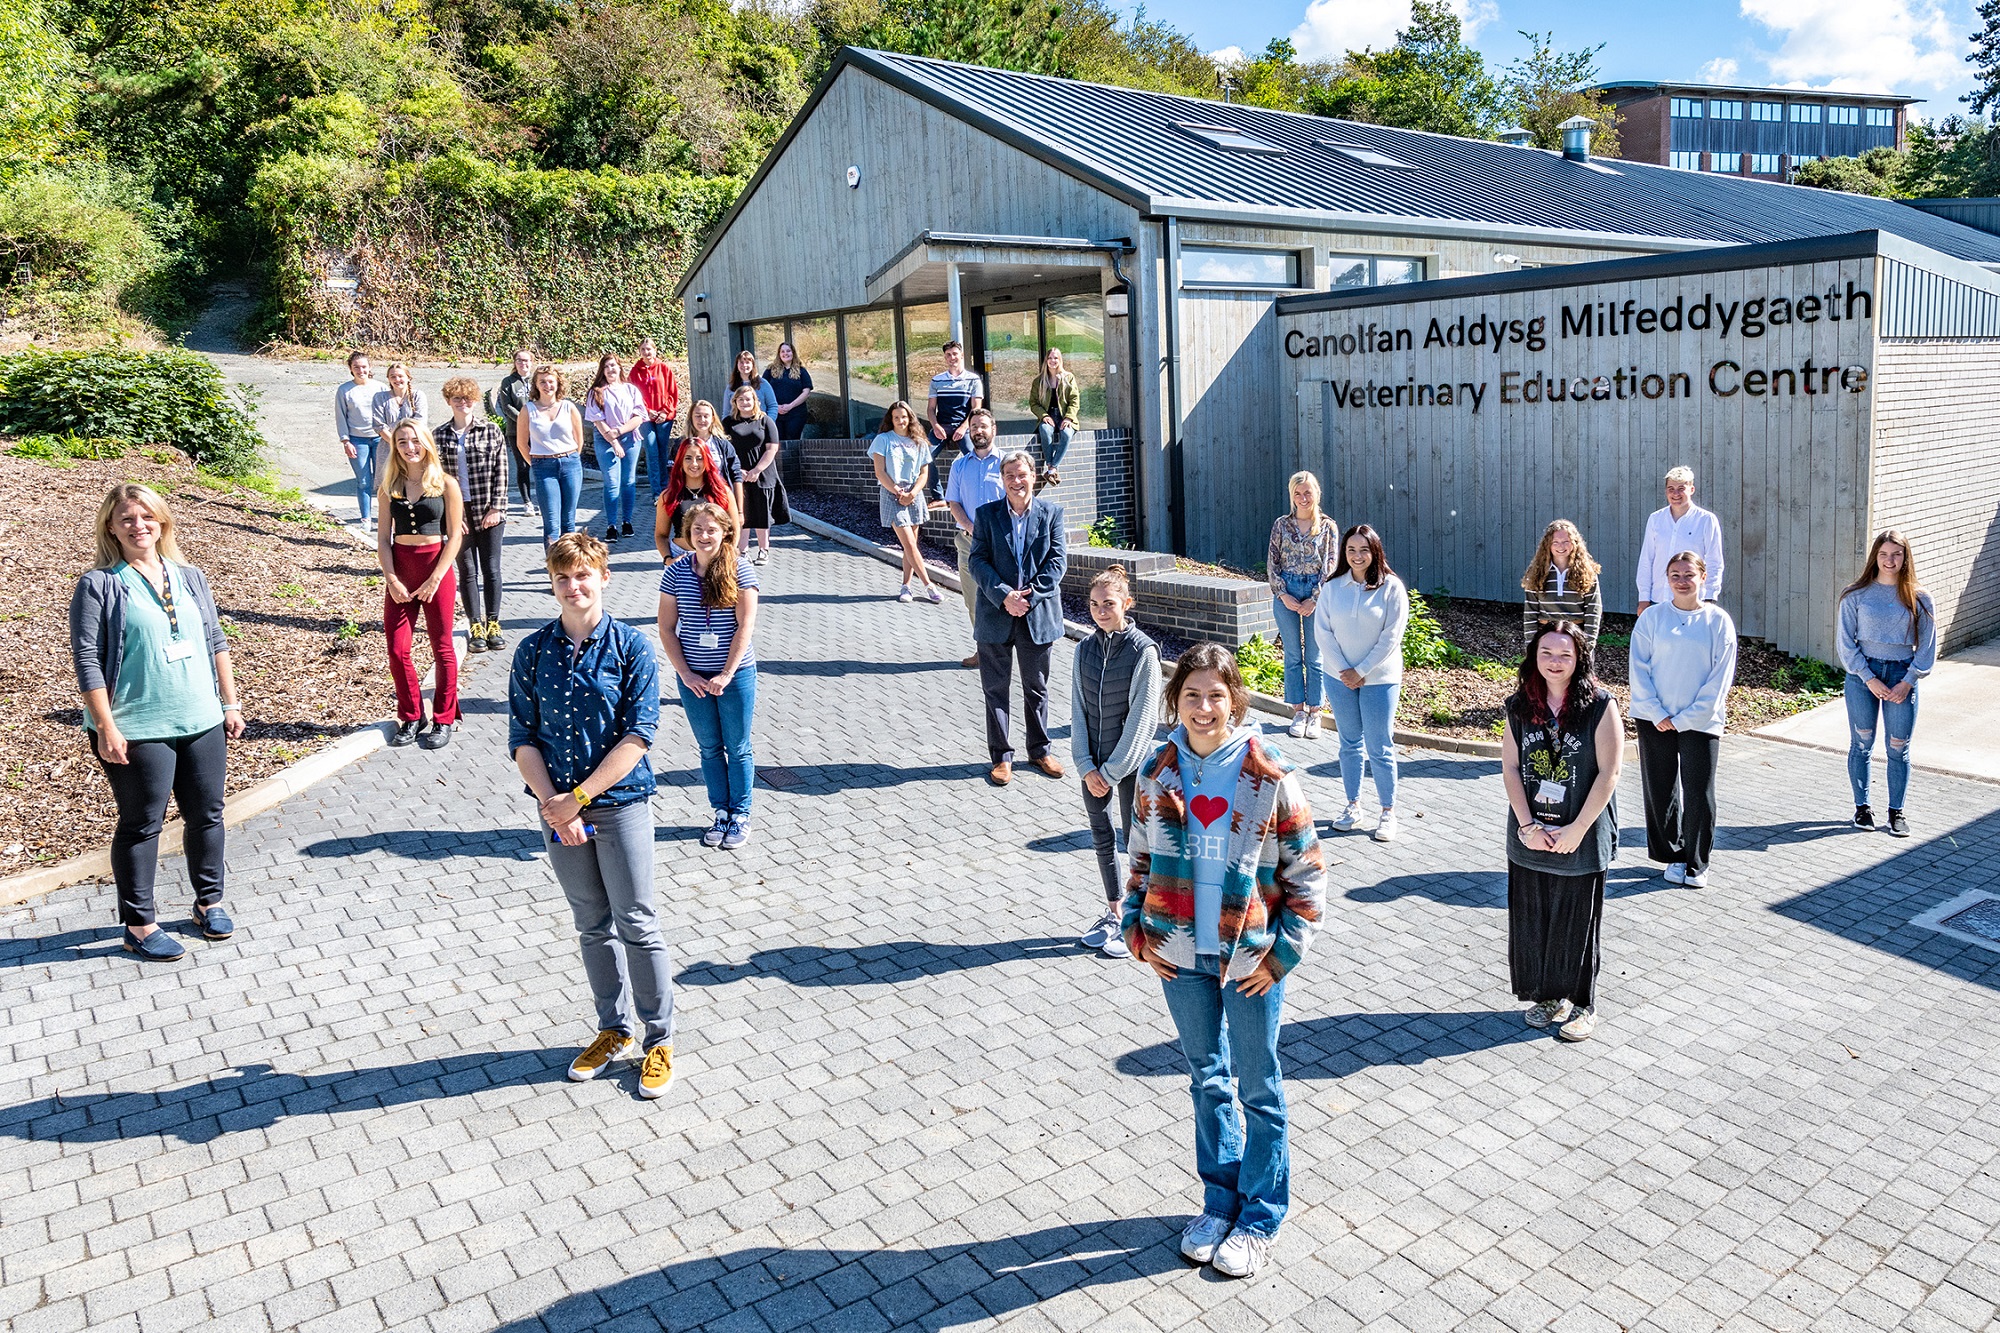 The first students started studying at Aberystwyth University's School of Veterinary Science in September 2021.